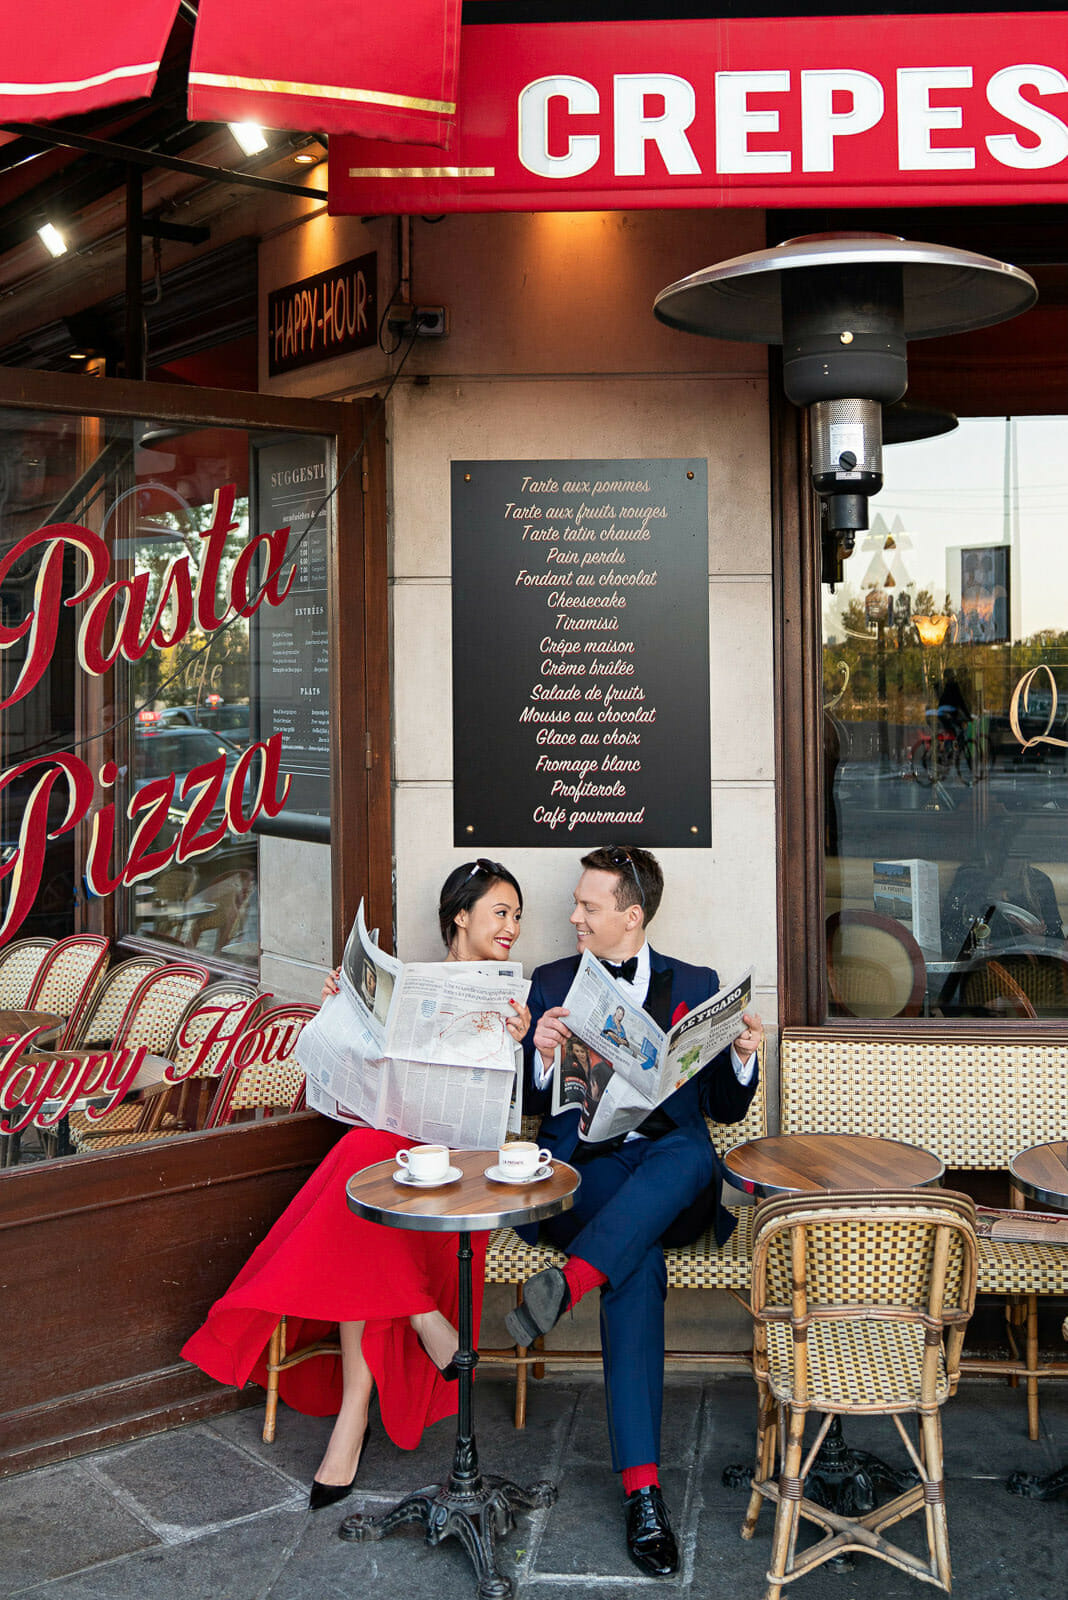 Cafe Paris photoshoot with creative props